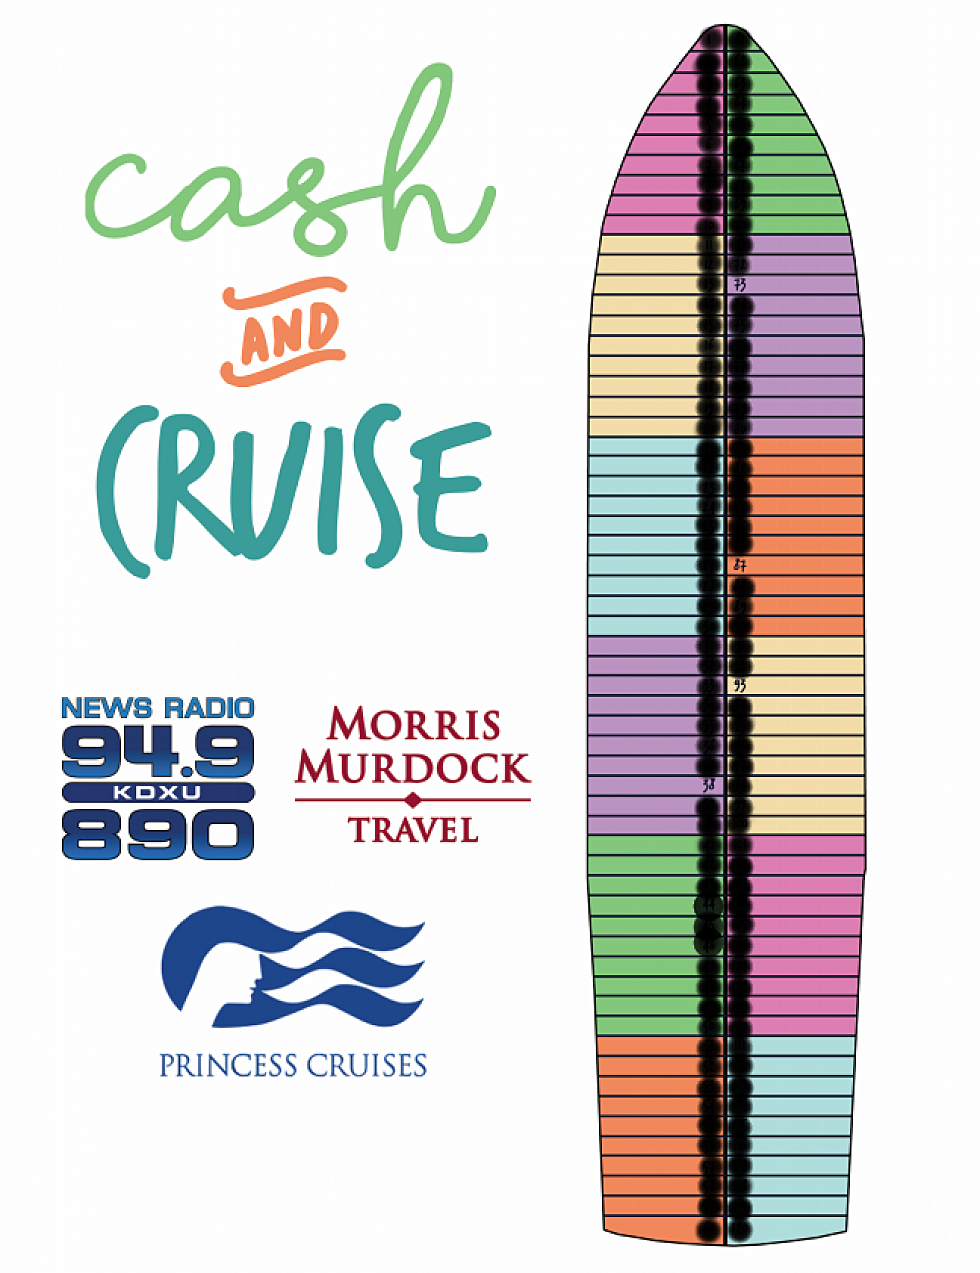 Cash and Cruise – your chance to win big!!! Updated daily!